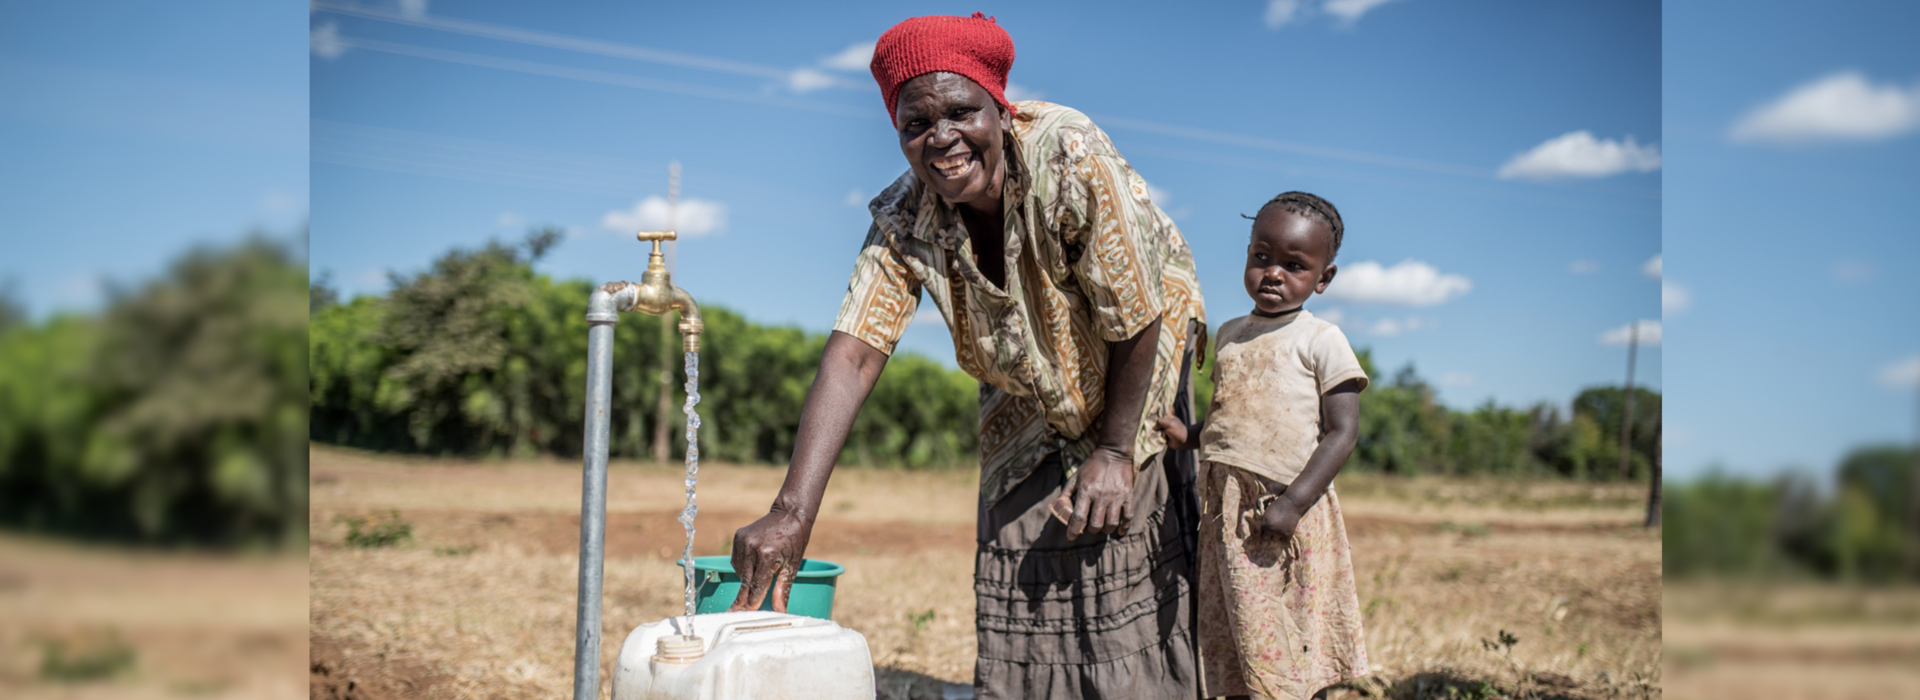 Water and Sanitation are Crucial for Health and Wellbeing